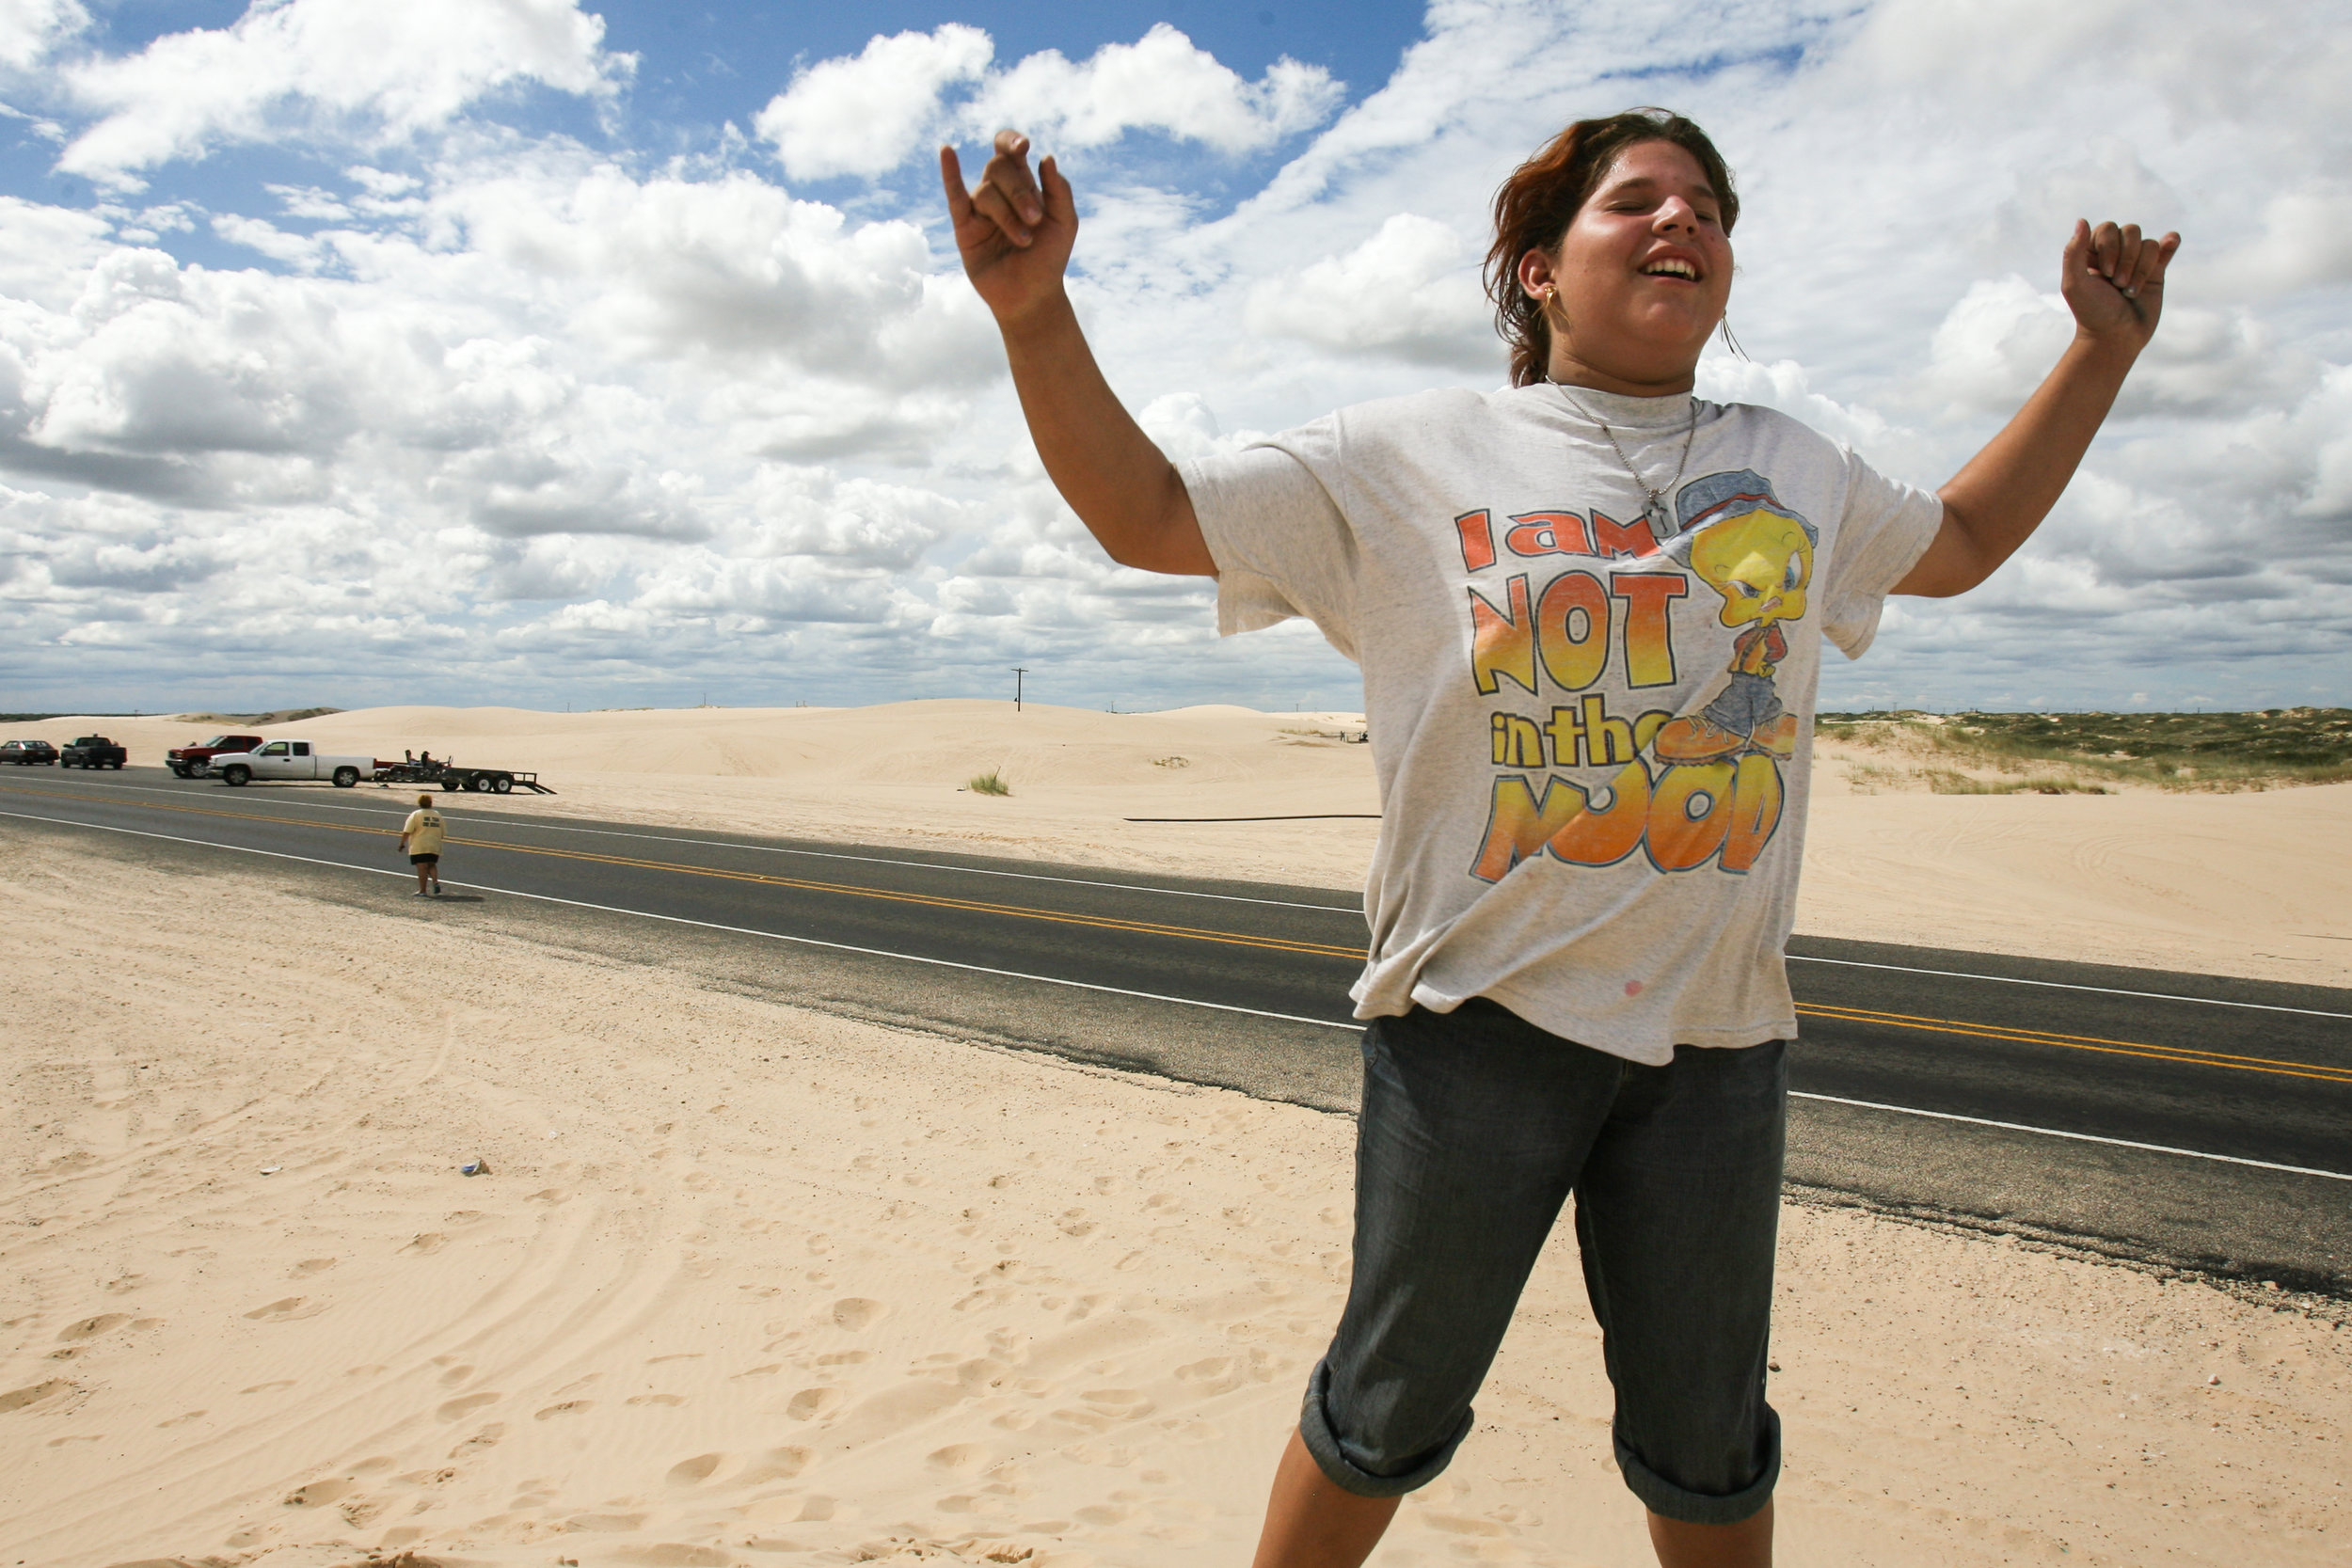  Angelica Brito, 12, celebrates successfully scaling a sand dune Saturday, Aug. 23, 2008, near the intersection of Farm to Market Roads 1053 and 1233 in Crane County, Texas. Brito and her mother took a trip out of Odessa for the day with fellow shelt